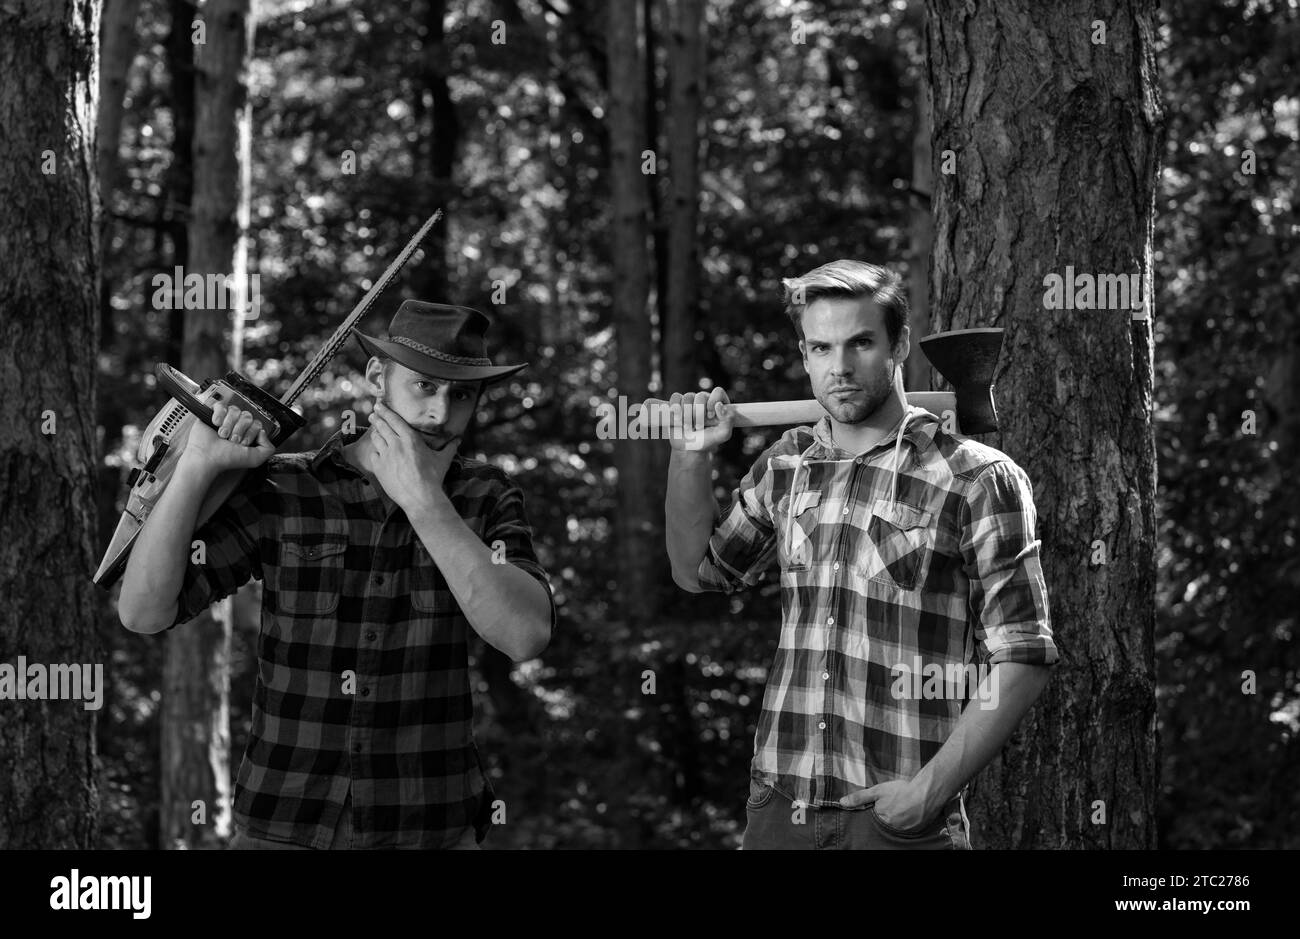 Foresters men. Man with serious face carries axe. Lumberjack brutal holds axe. Brutal lumberjack concept. Stock Photo